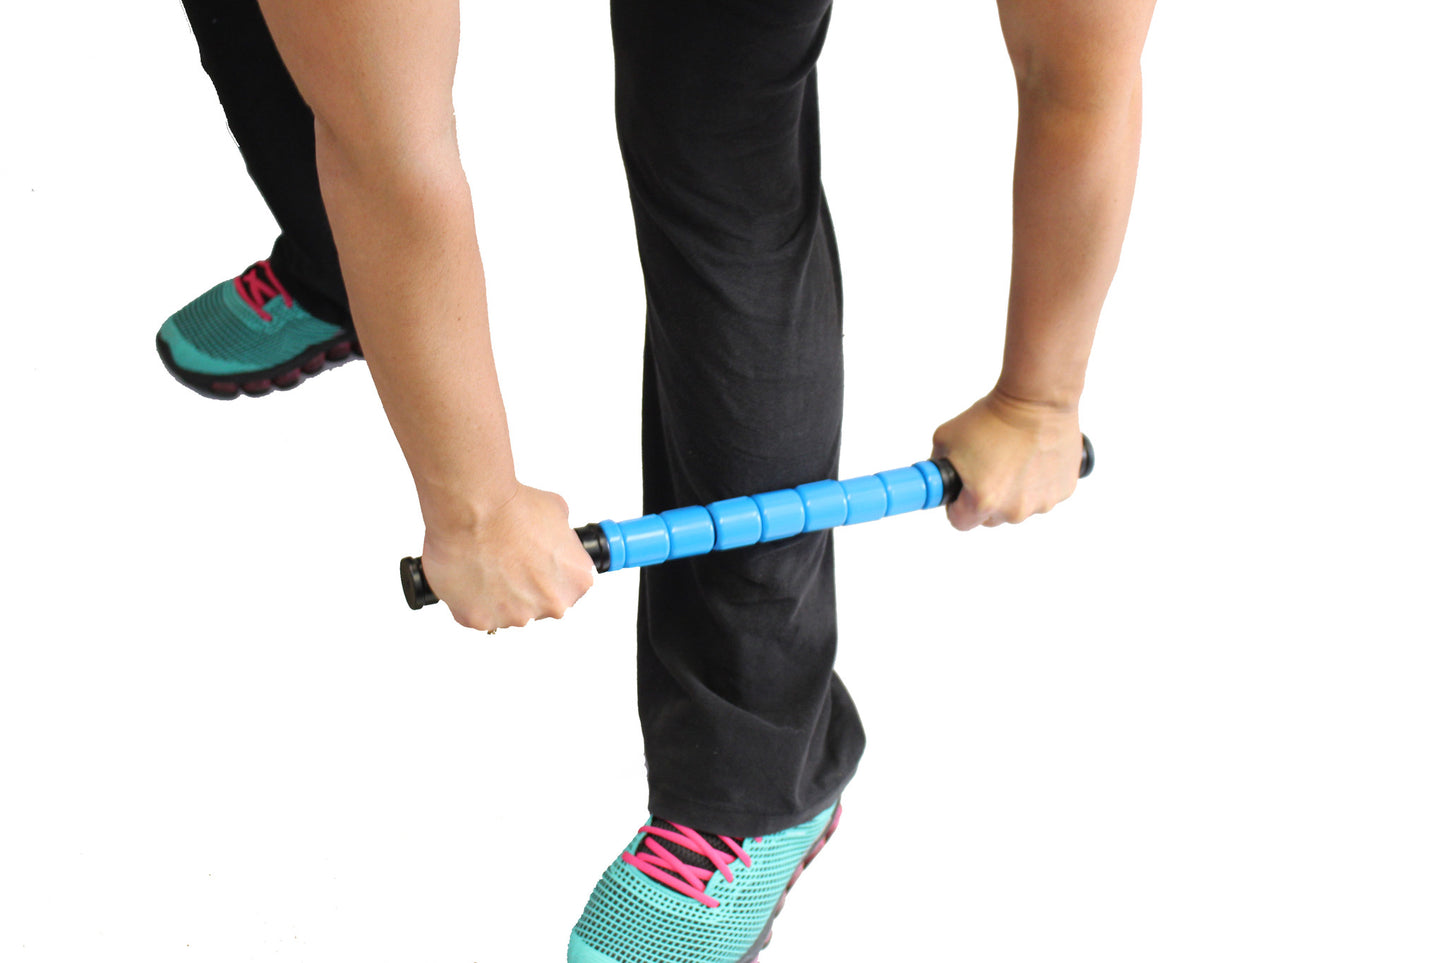 Massage Roller Stick | Muscle Roller Stick - Neck/Back Roller For Muscles Deep Tissue | The Stick For Runners Muscle Soreness Relief